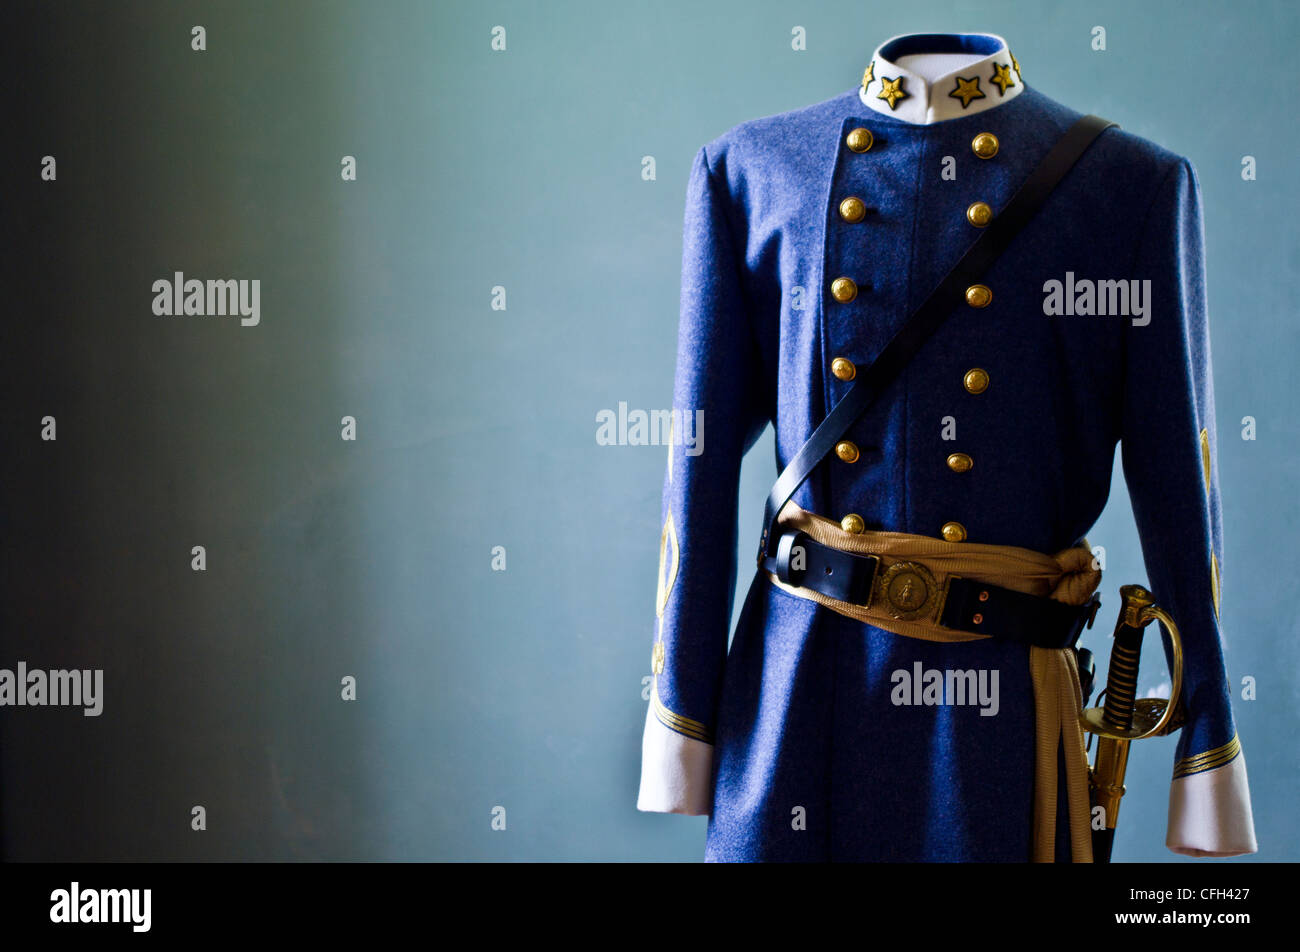 Replica of a Confederate Army uniform worn by a son of Robert E. Lee. Stock Photo